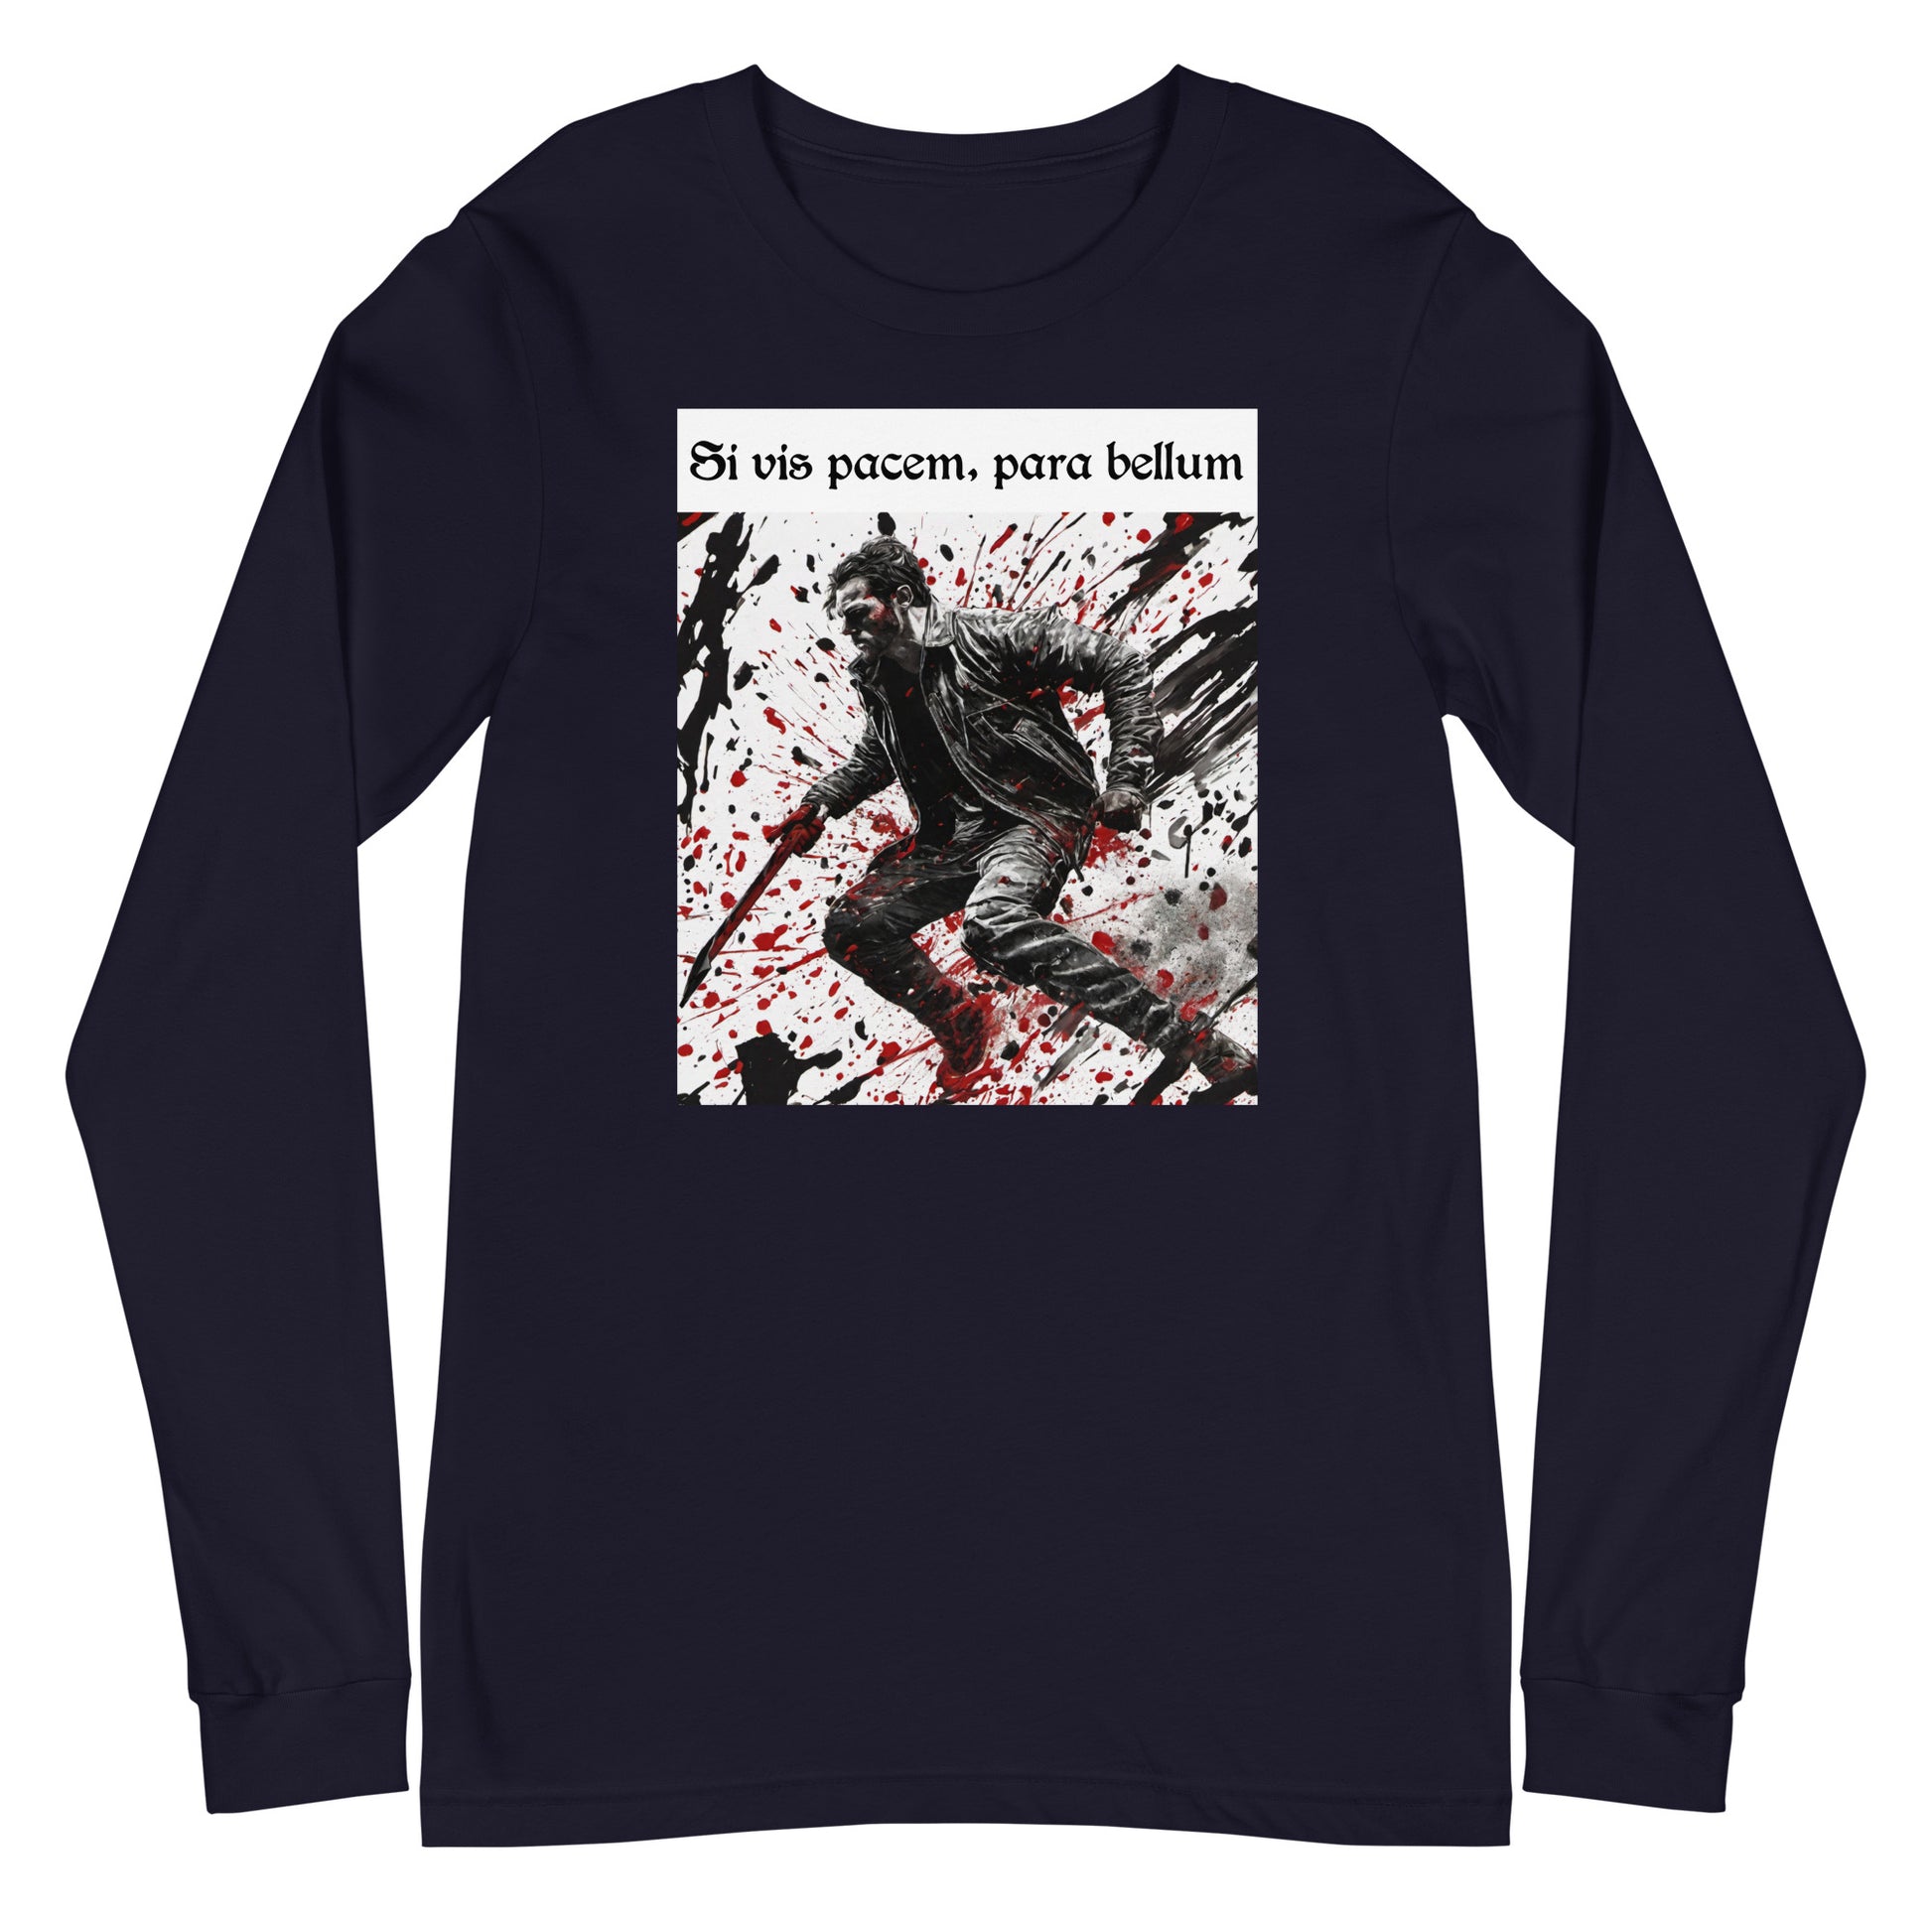 If You Want Peace, Prepare for War Men's Long Sleeve Tee Navy